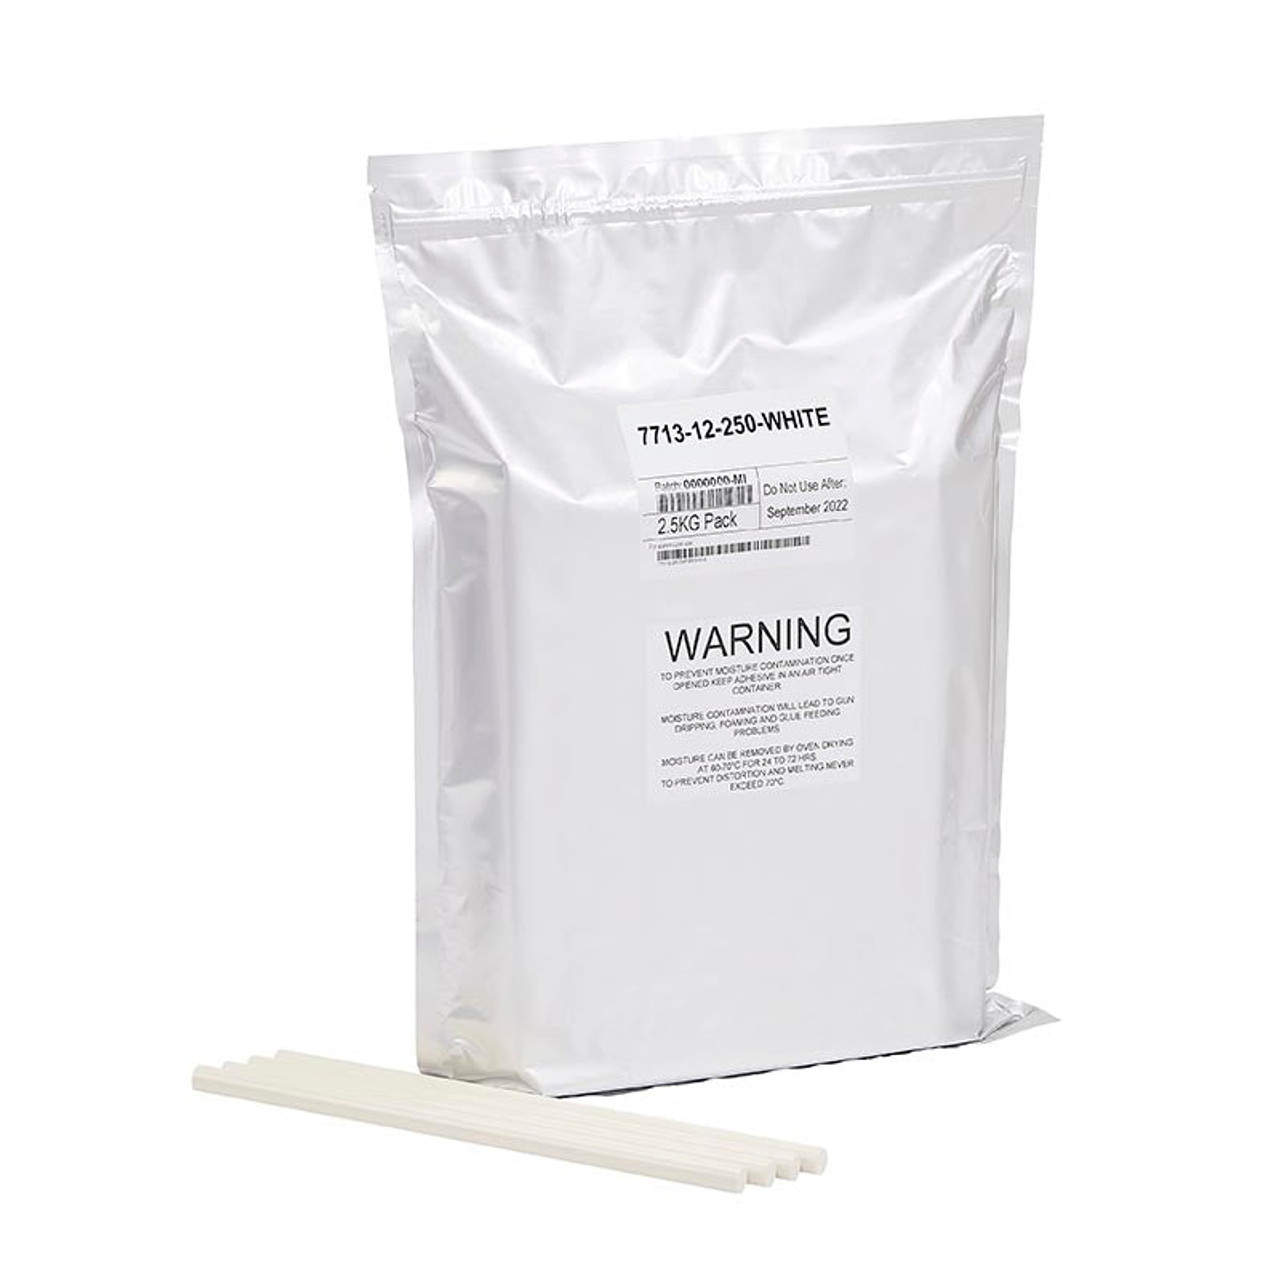 KNOTTEC Adhesives  Wood Repair with  for KNOTTEC Adhesives | Wood Repair White Therm Melt Adhesives  in Pack of 5 sticks that have Therm Melt  available in Australia and New Zealand